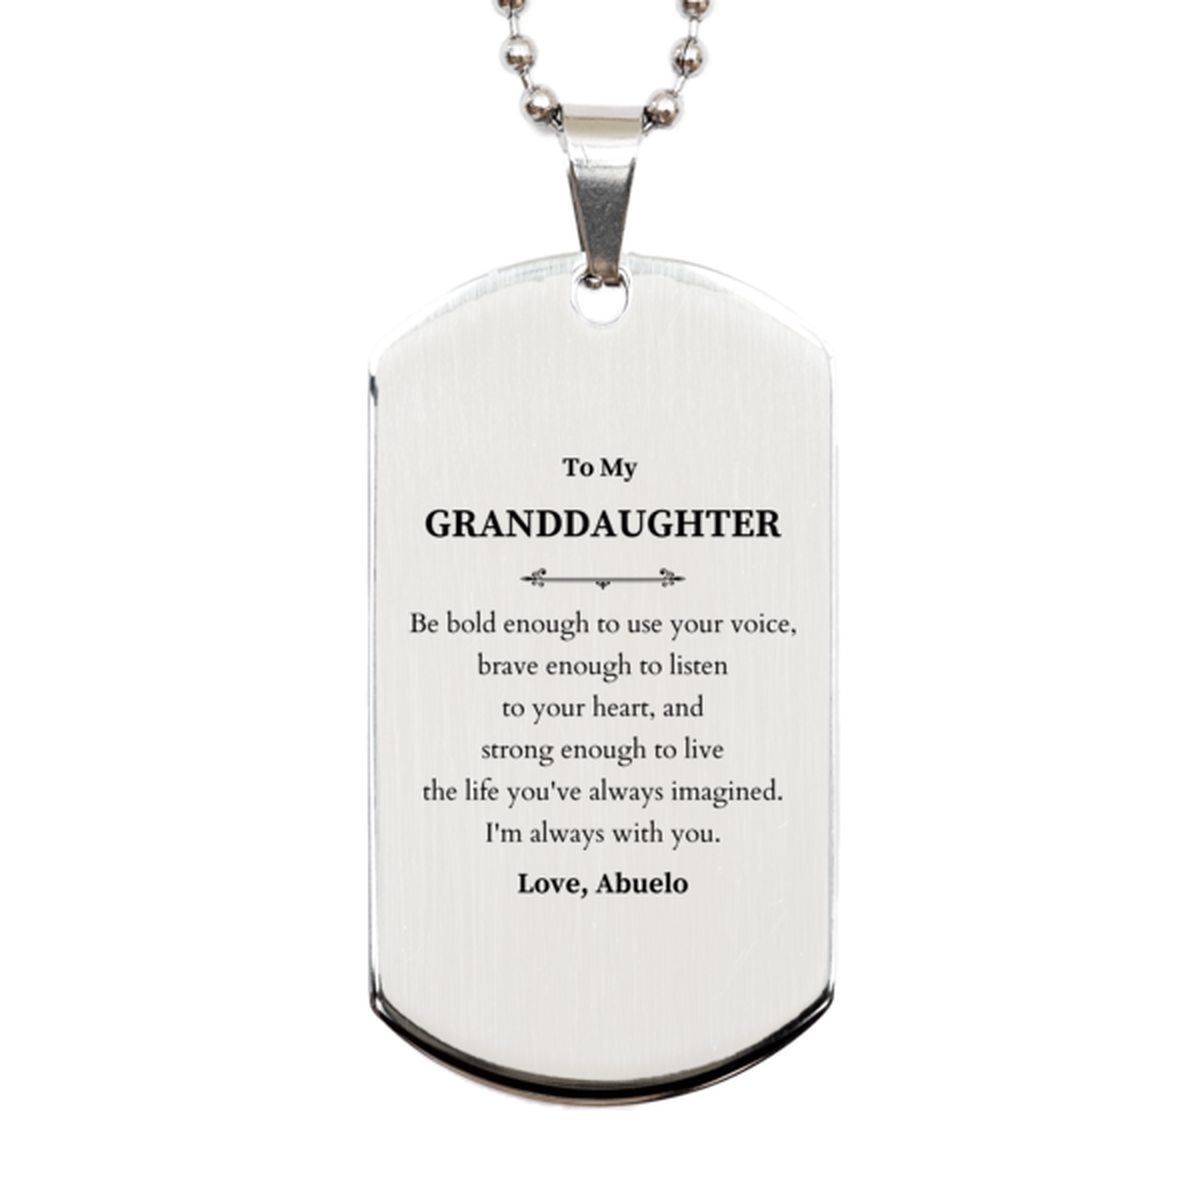 Keepsake Granddaughter Silver Dog Tag Gift Idea Graduation Christmas Birthday Granddaughter from Abuelo, Granddaughter Be bold enough to use your voice, brave enough to listen to your heart. Love, Abuelo